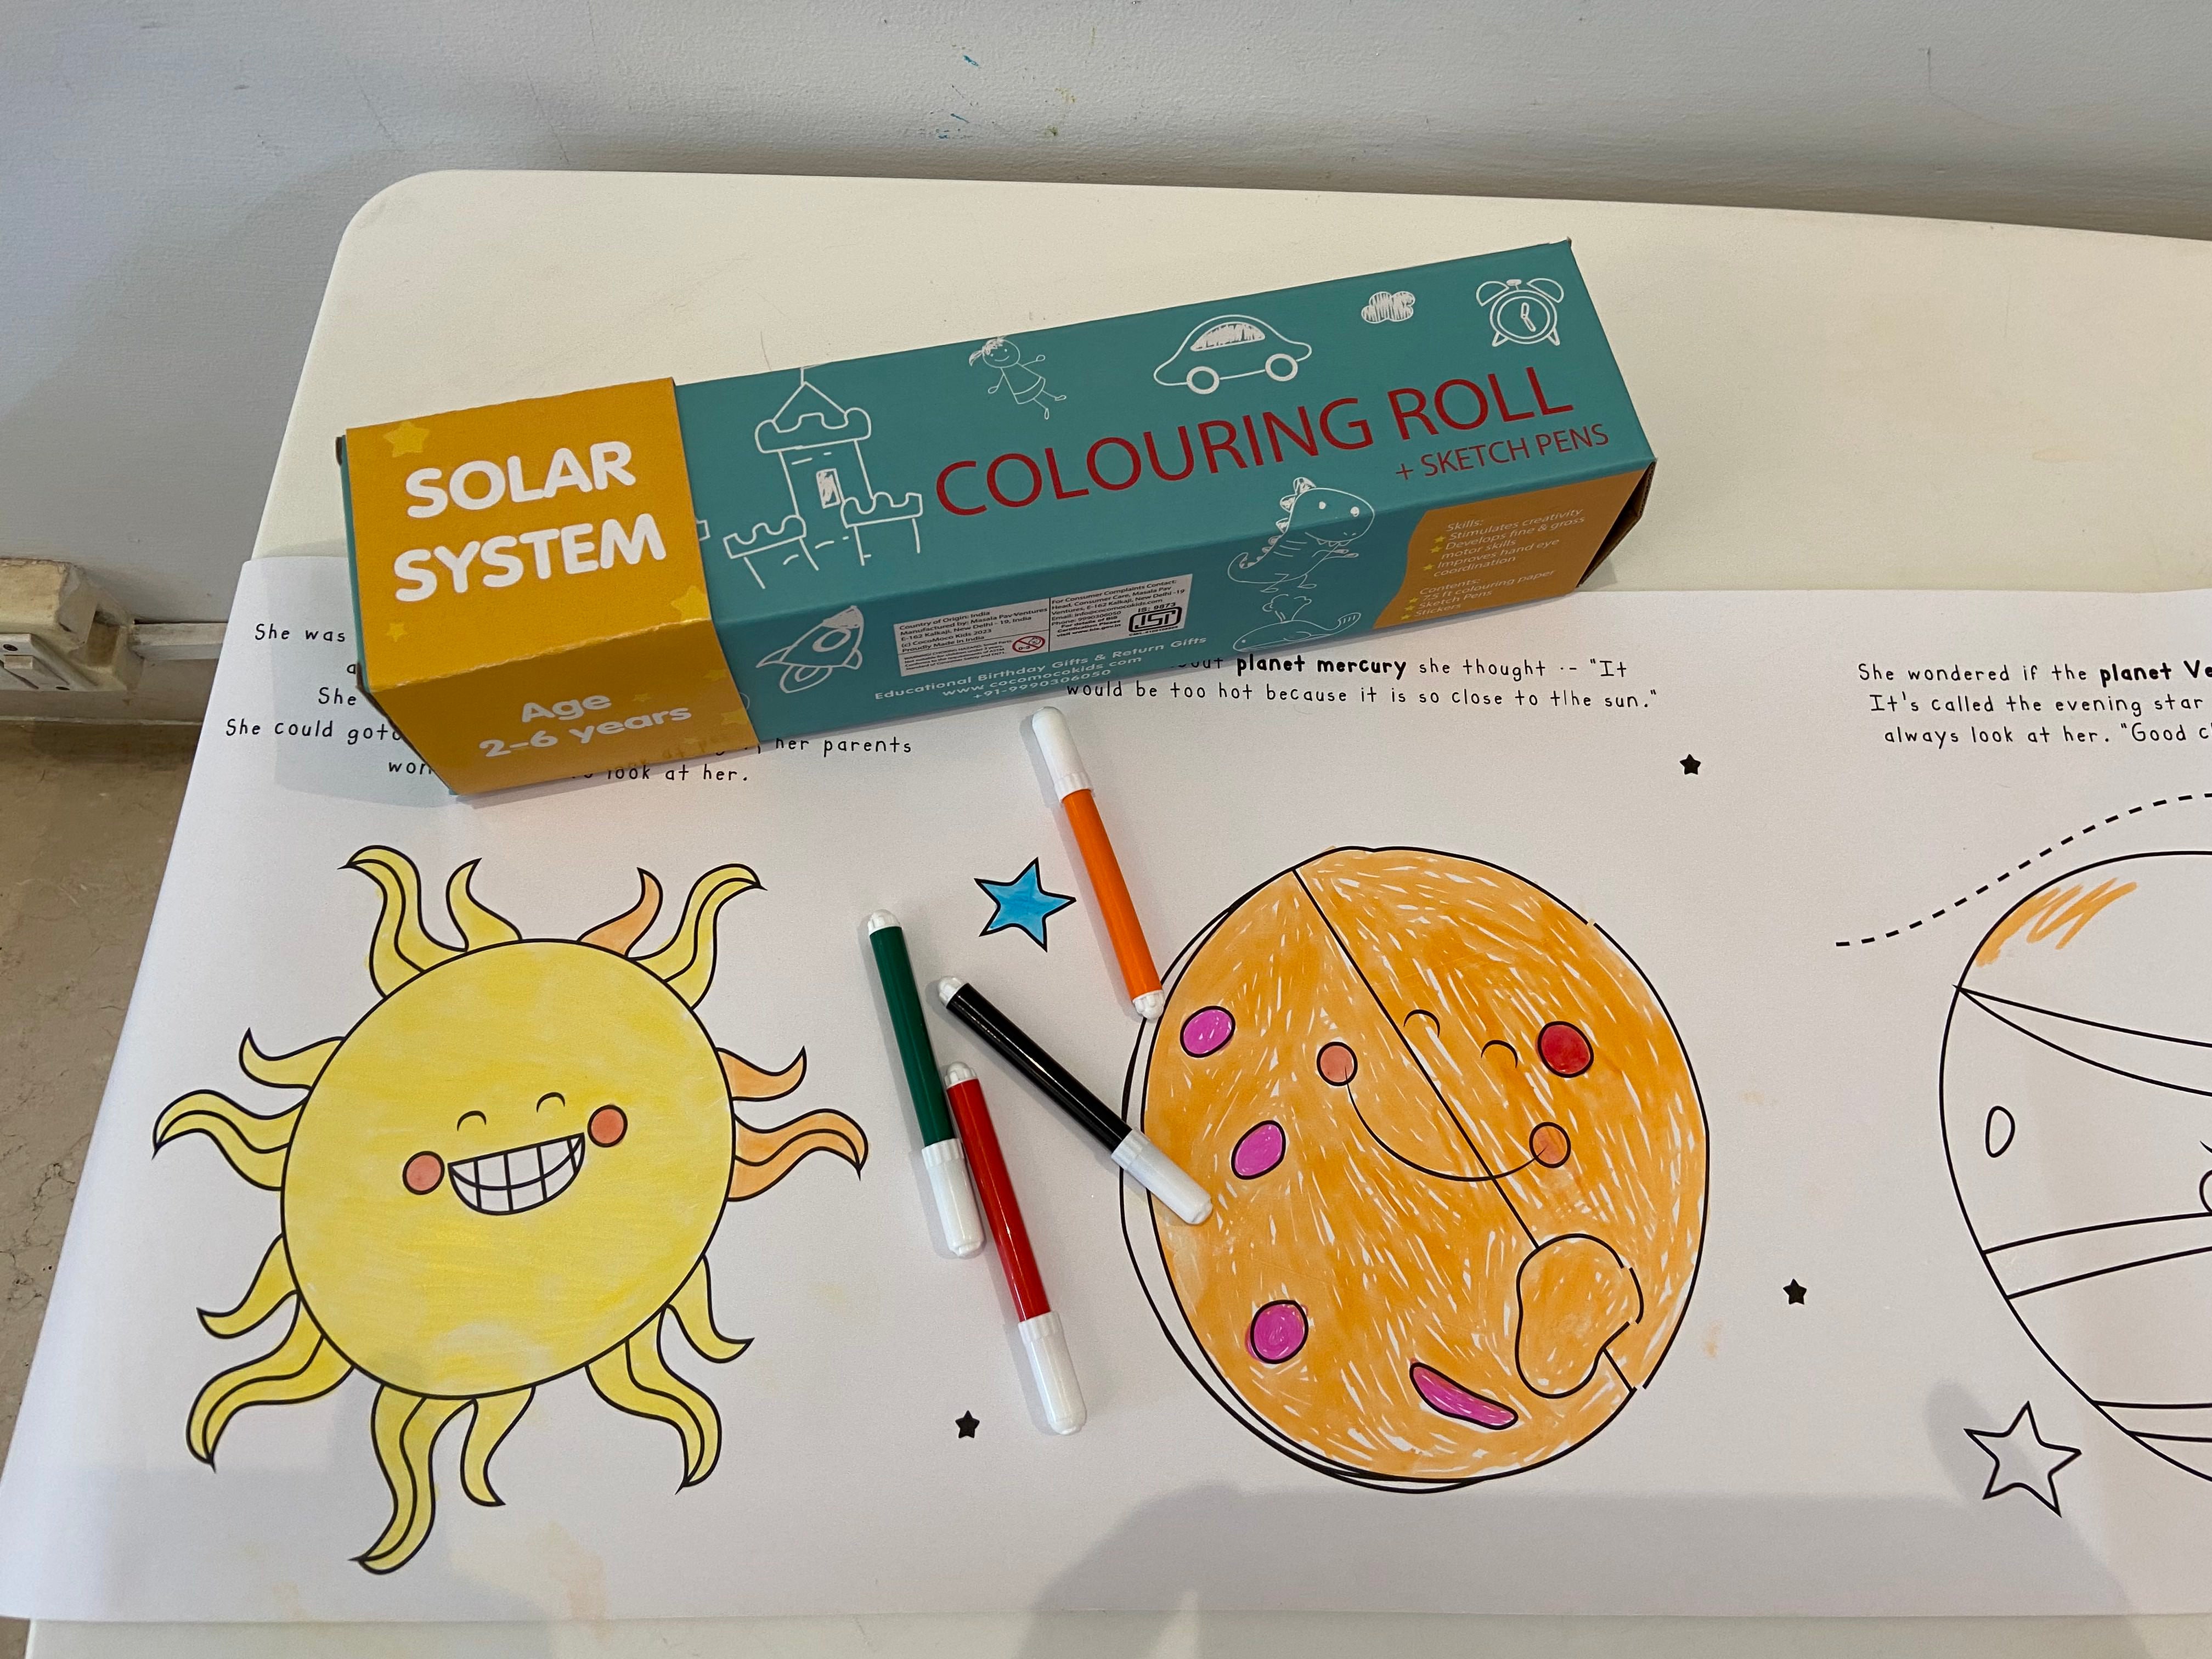 Draw And Learn Names Of Planets In Our Solar System . Solar System Drawing  Coloring Page. - YouTube